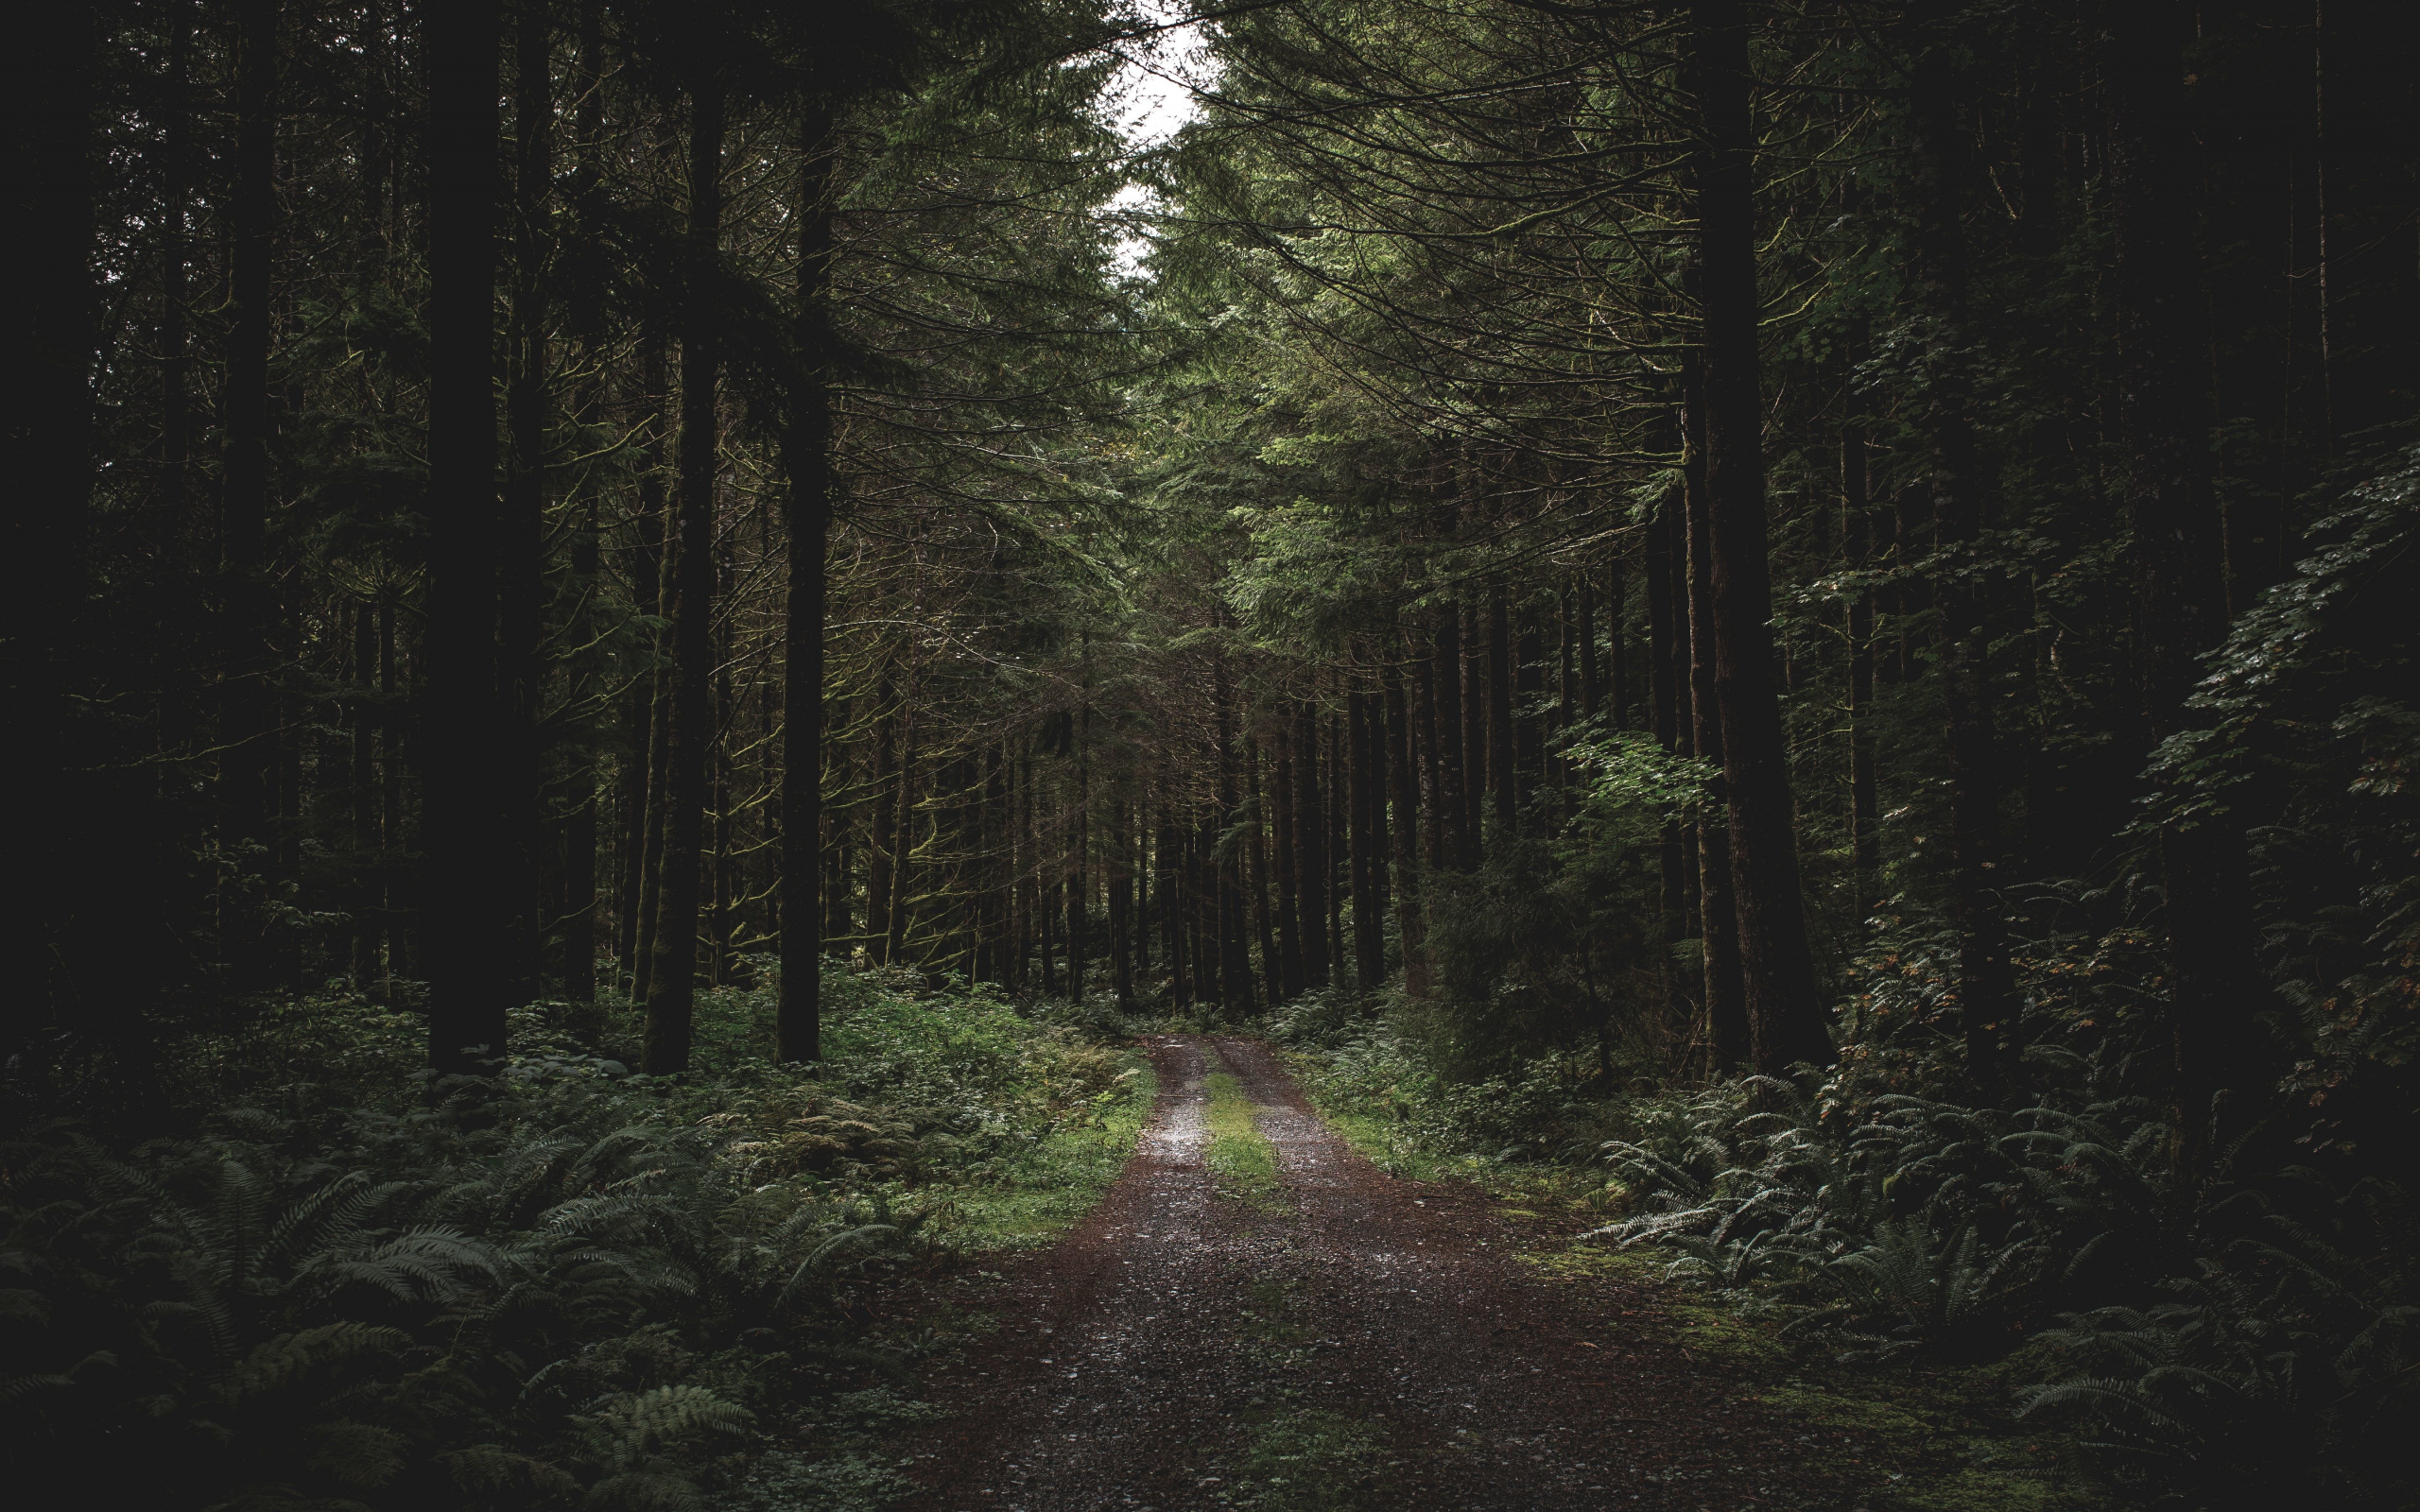 Dirt road, path, trees, forest, greenery, 2560x1600 wallpaper